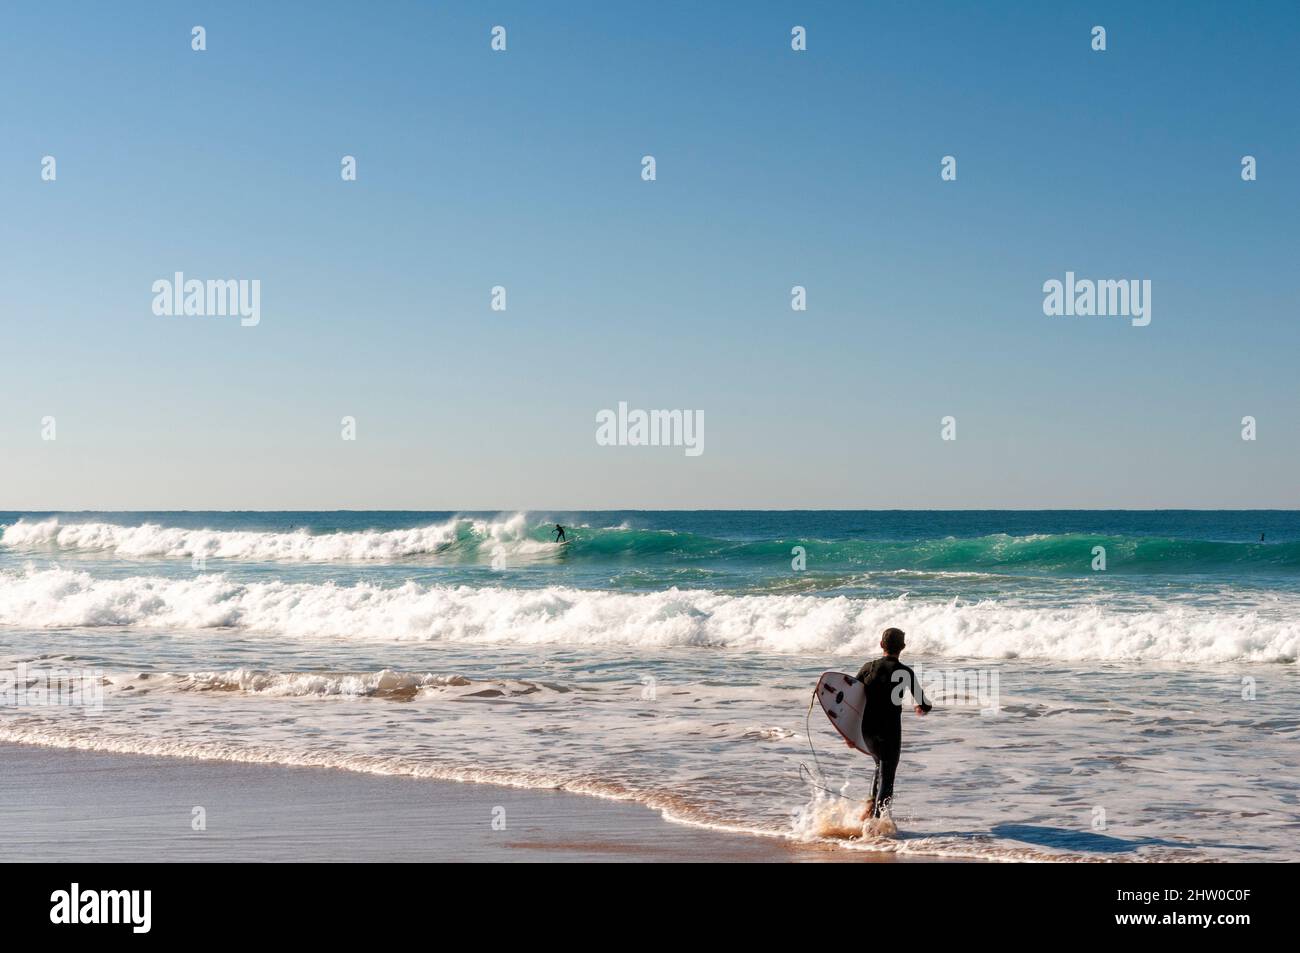 Surfer entering the water with their board on beautiful Portugese beach Stock Photo